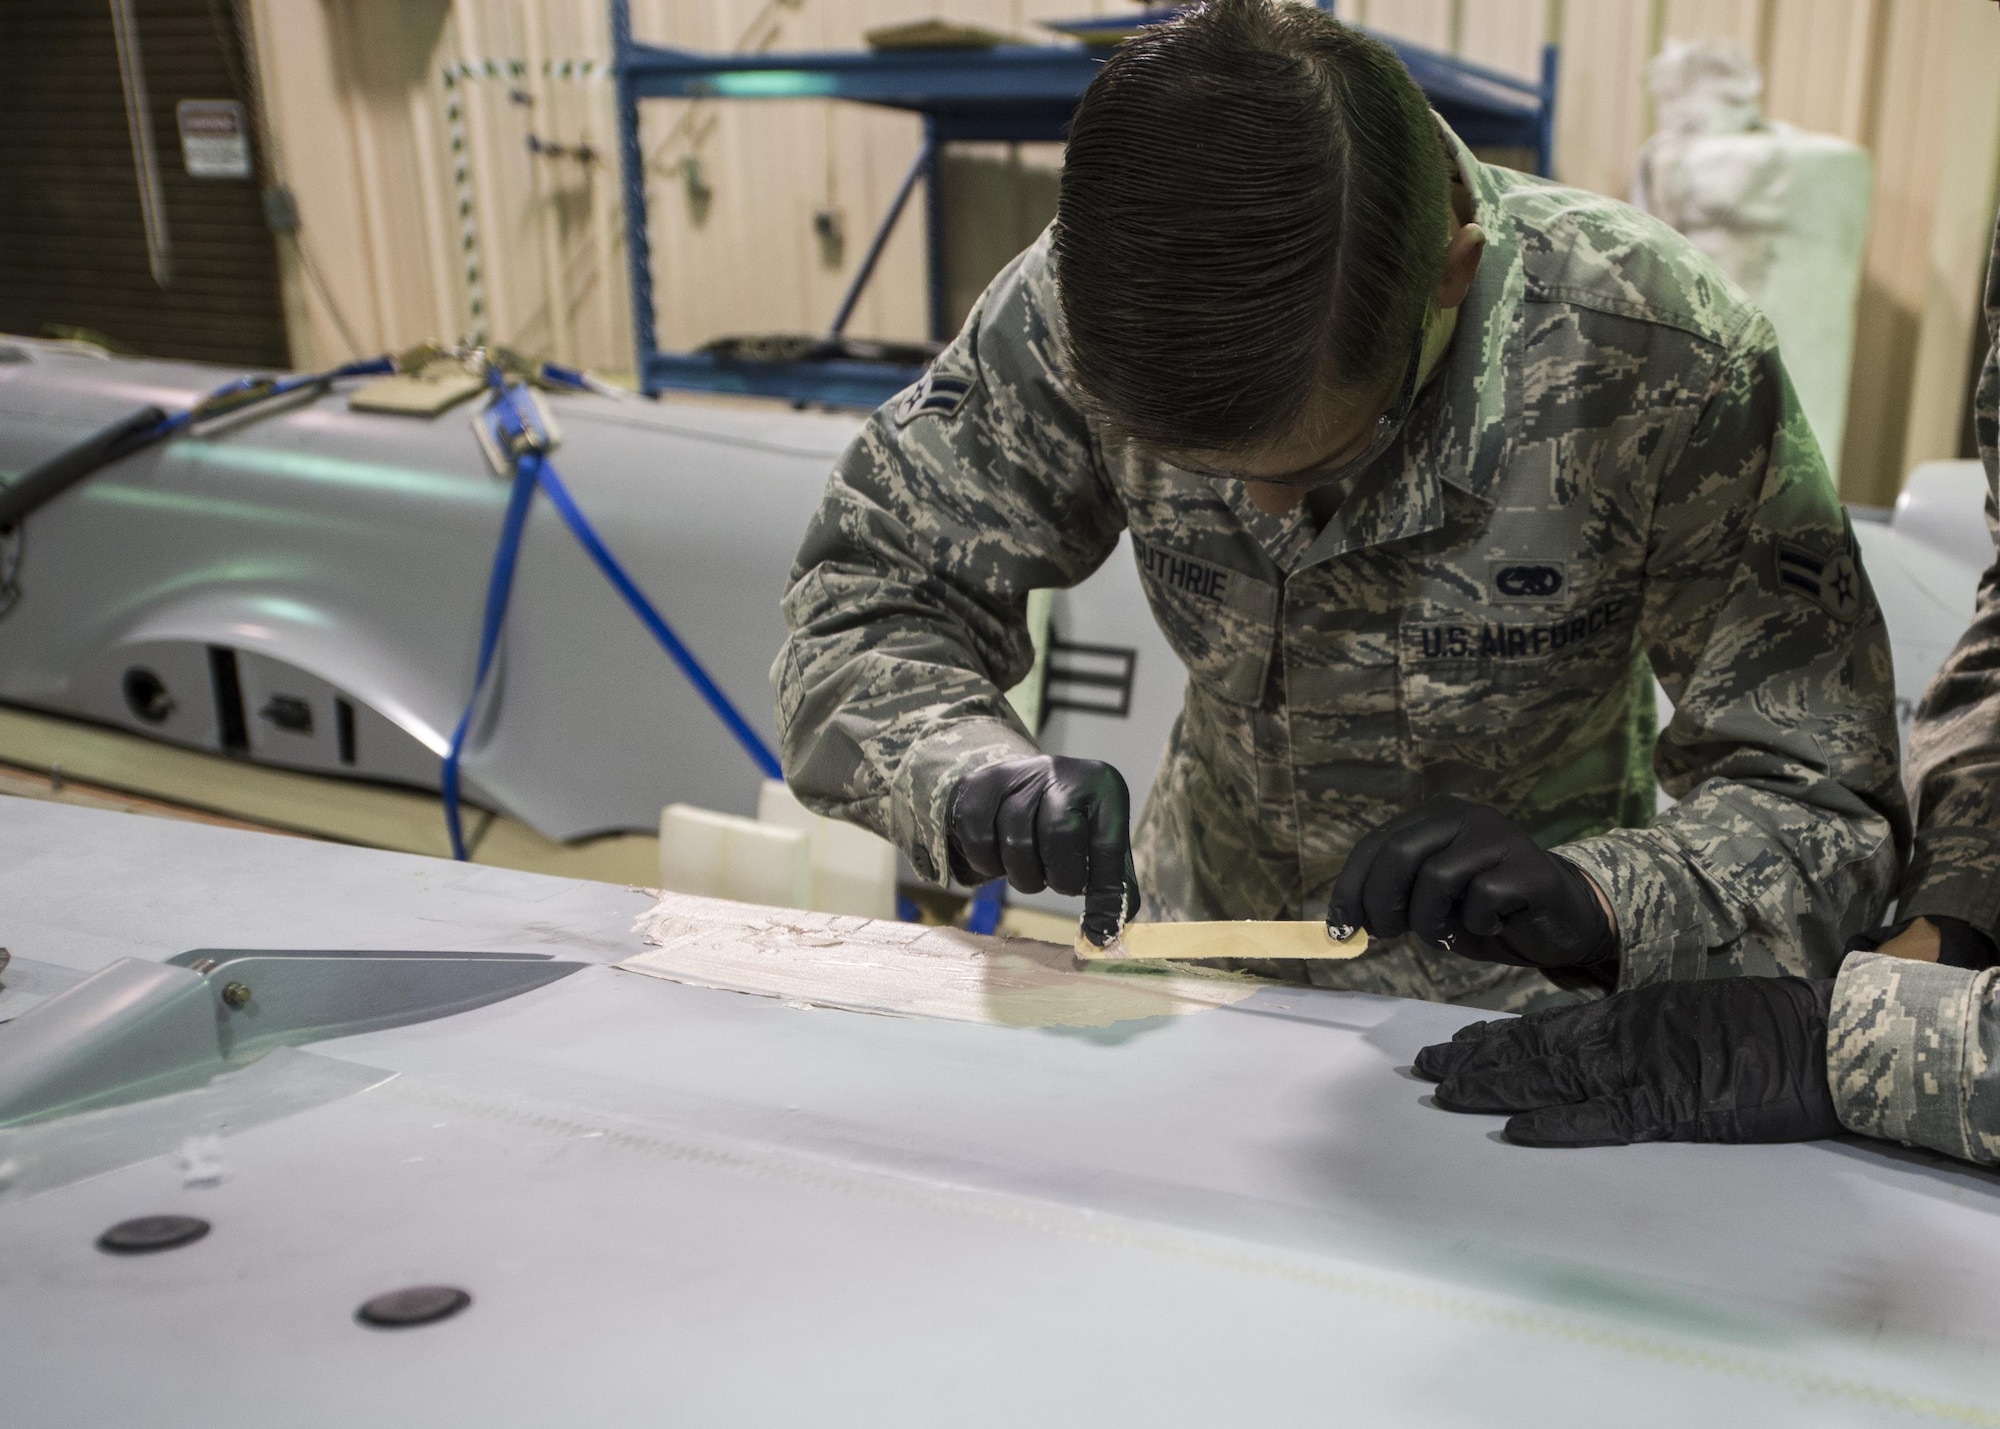 Airman 1st Class Joshua Guthrie, a 49th Maintenance Squadron aircraft structural maintenance technician, applies aircraft smoothing compound to an MQ-1 Predator wing, Dec. 14, 2016, at Holloman Air Force Base, N.M. The sheet metal shop has been prepping an MQ-1 Predator static display for Heritage Park, pending the Predator’s retirement in early 2017. (U.S. Air Force photo by Senior Airman Emily Kenney)